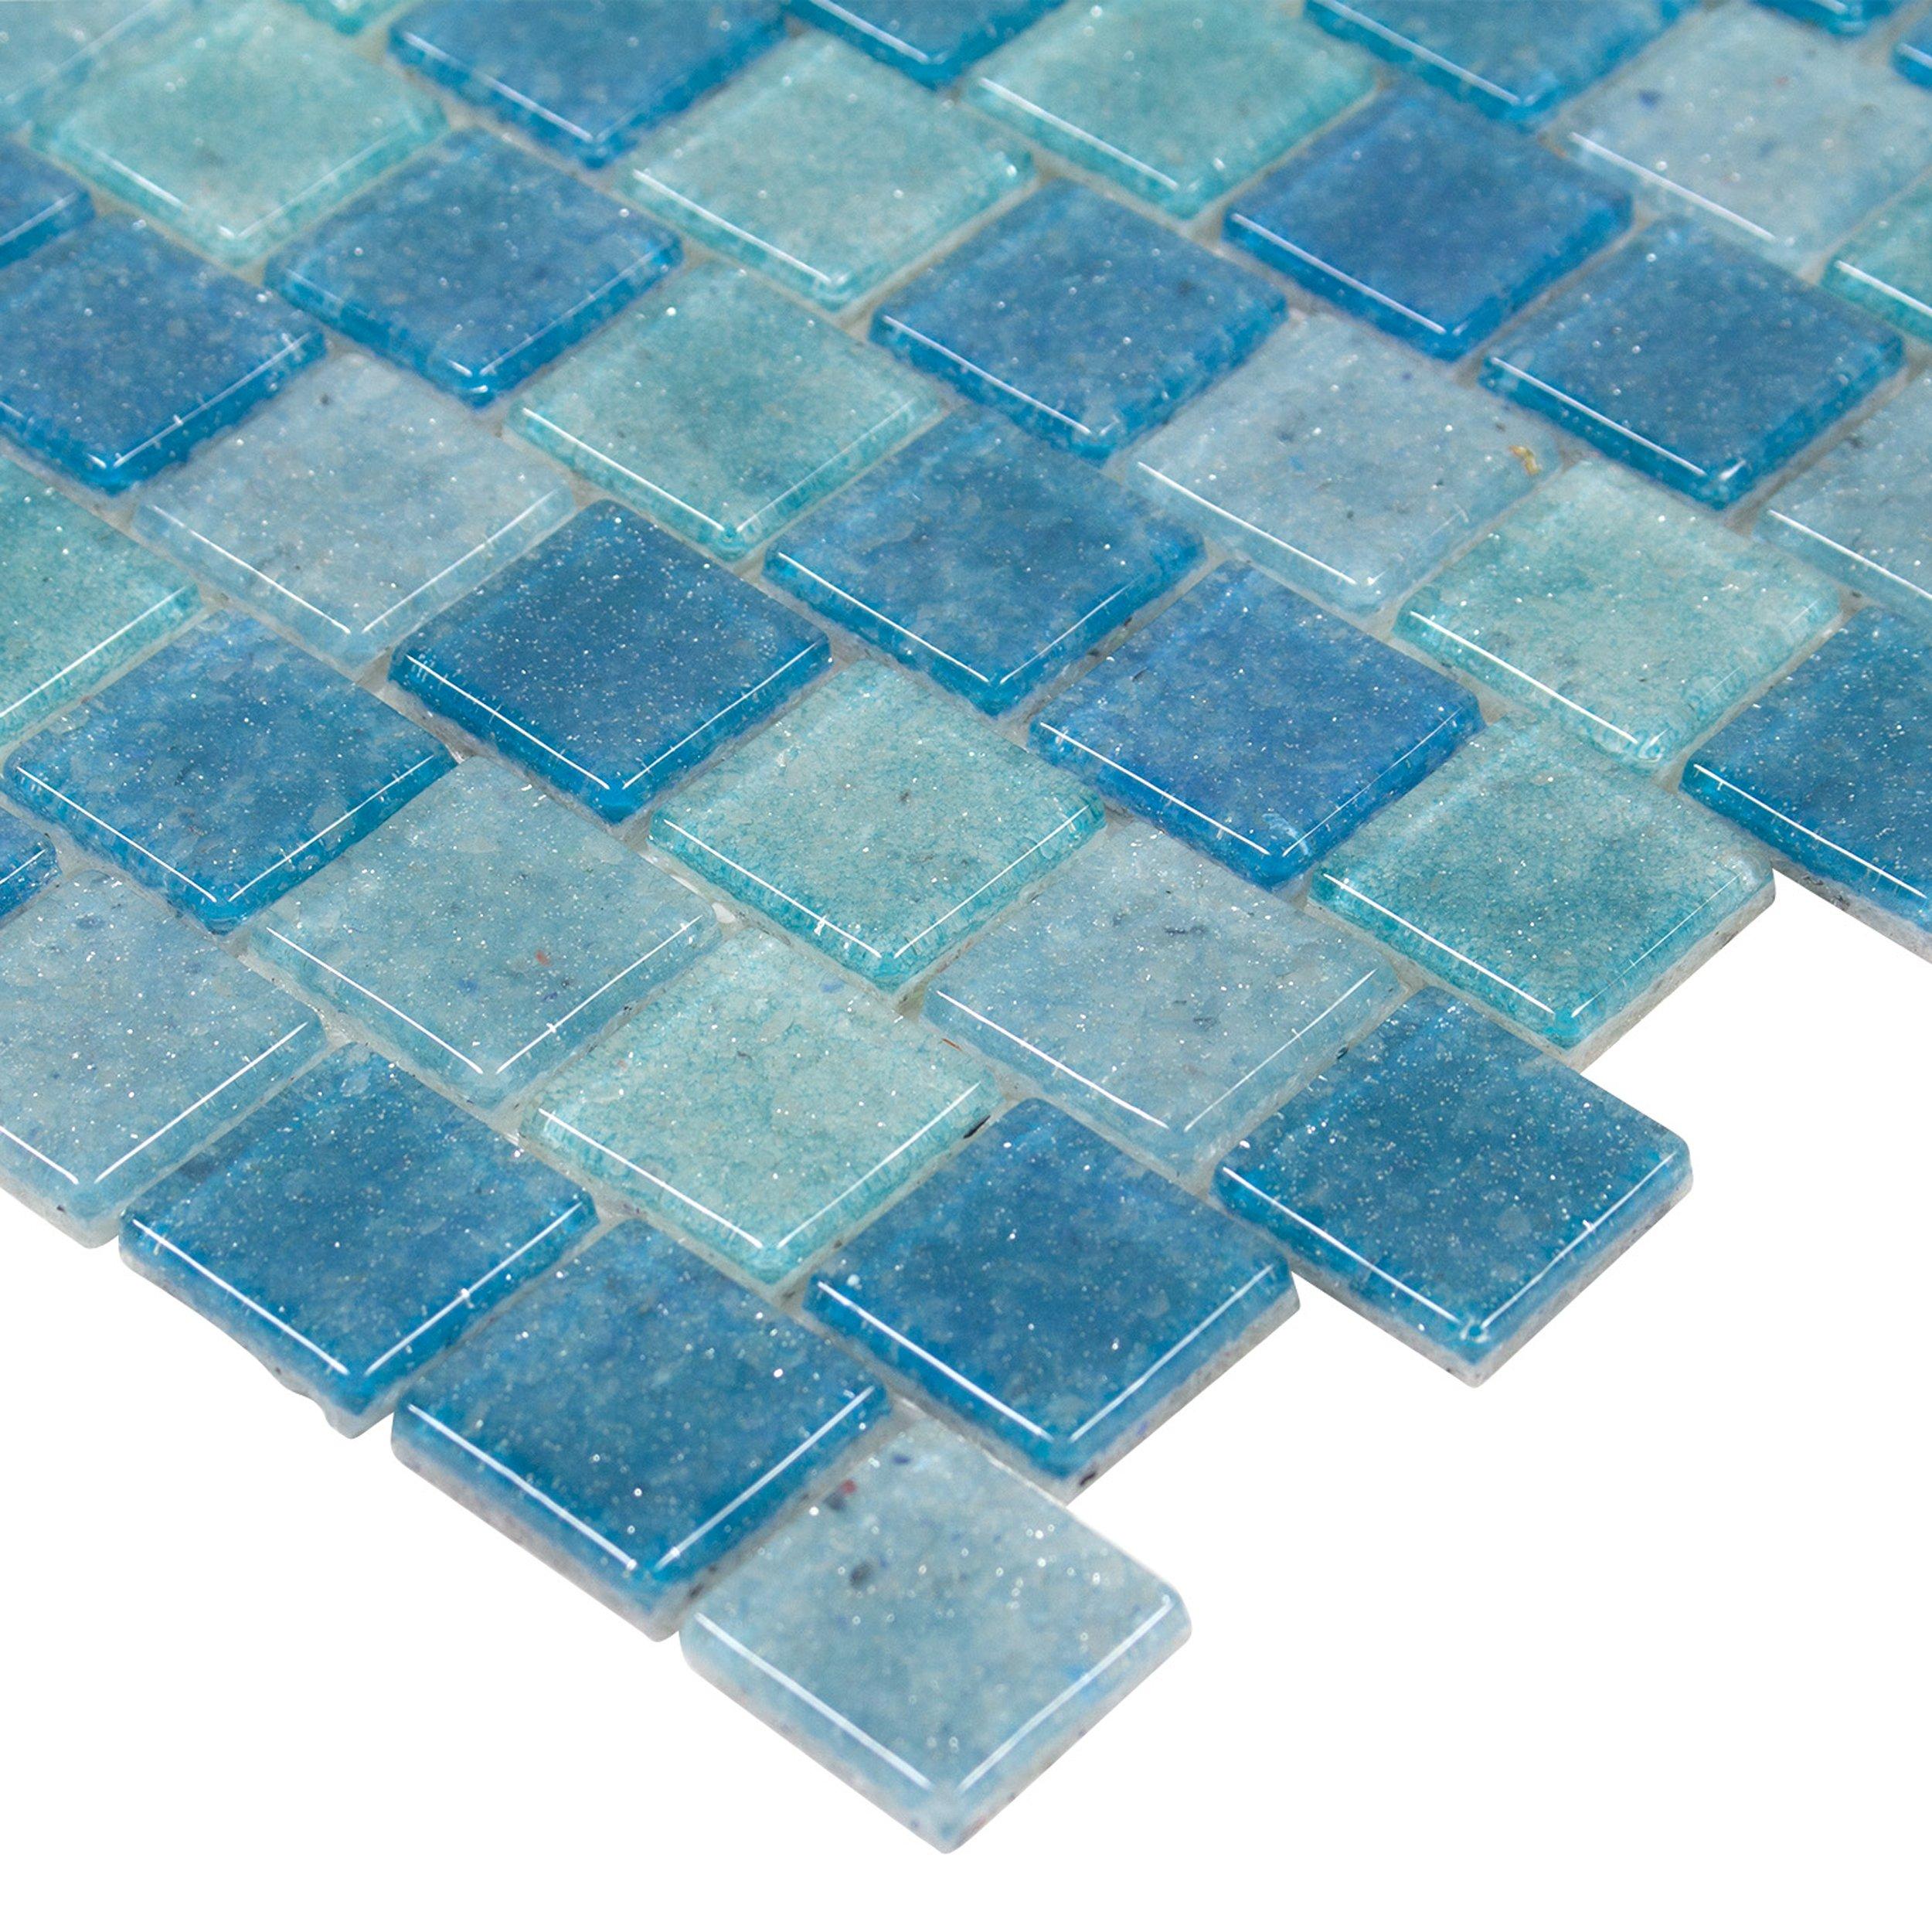 Cabo Azul 1 x 1 in. Square Glass Mosaic